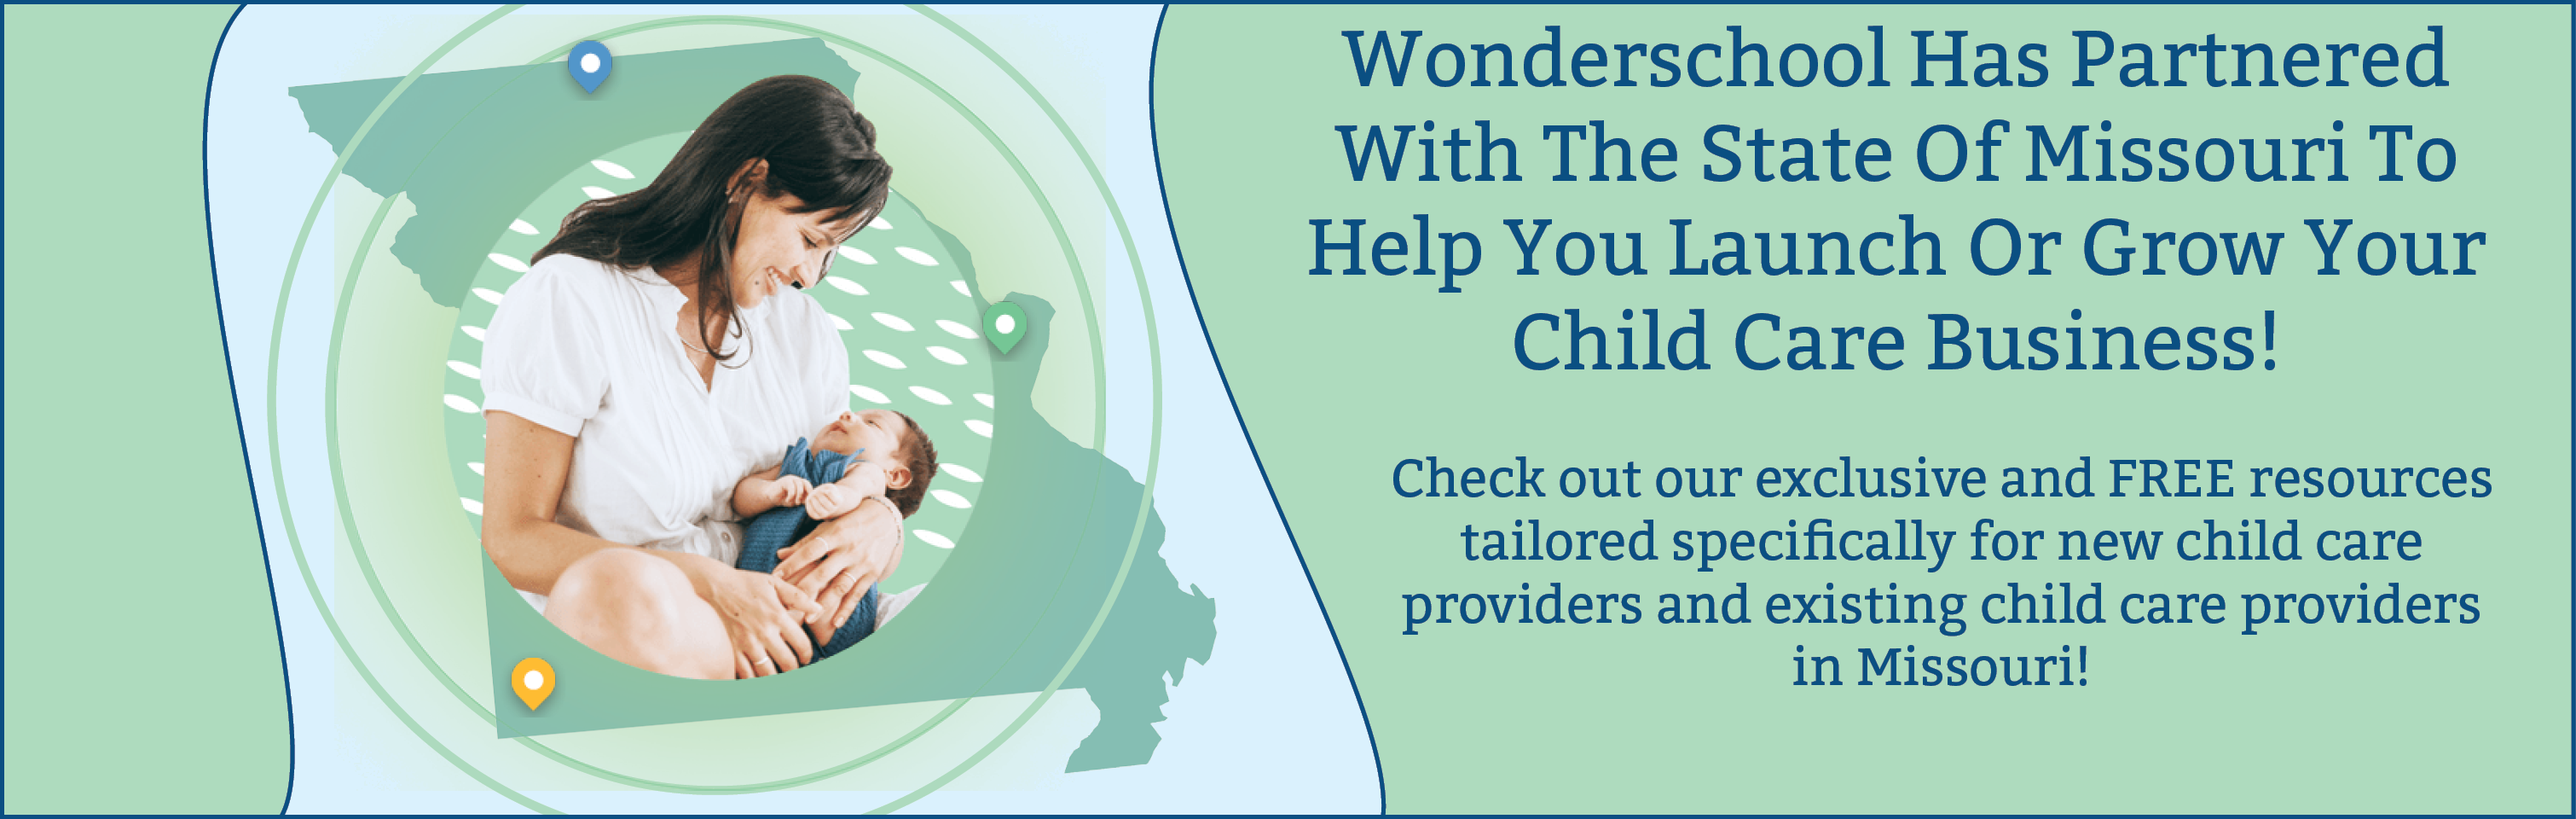 Wonderschool has partnered with the State of Missouri to help launch or Grow childcare business